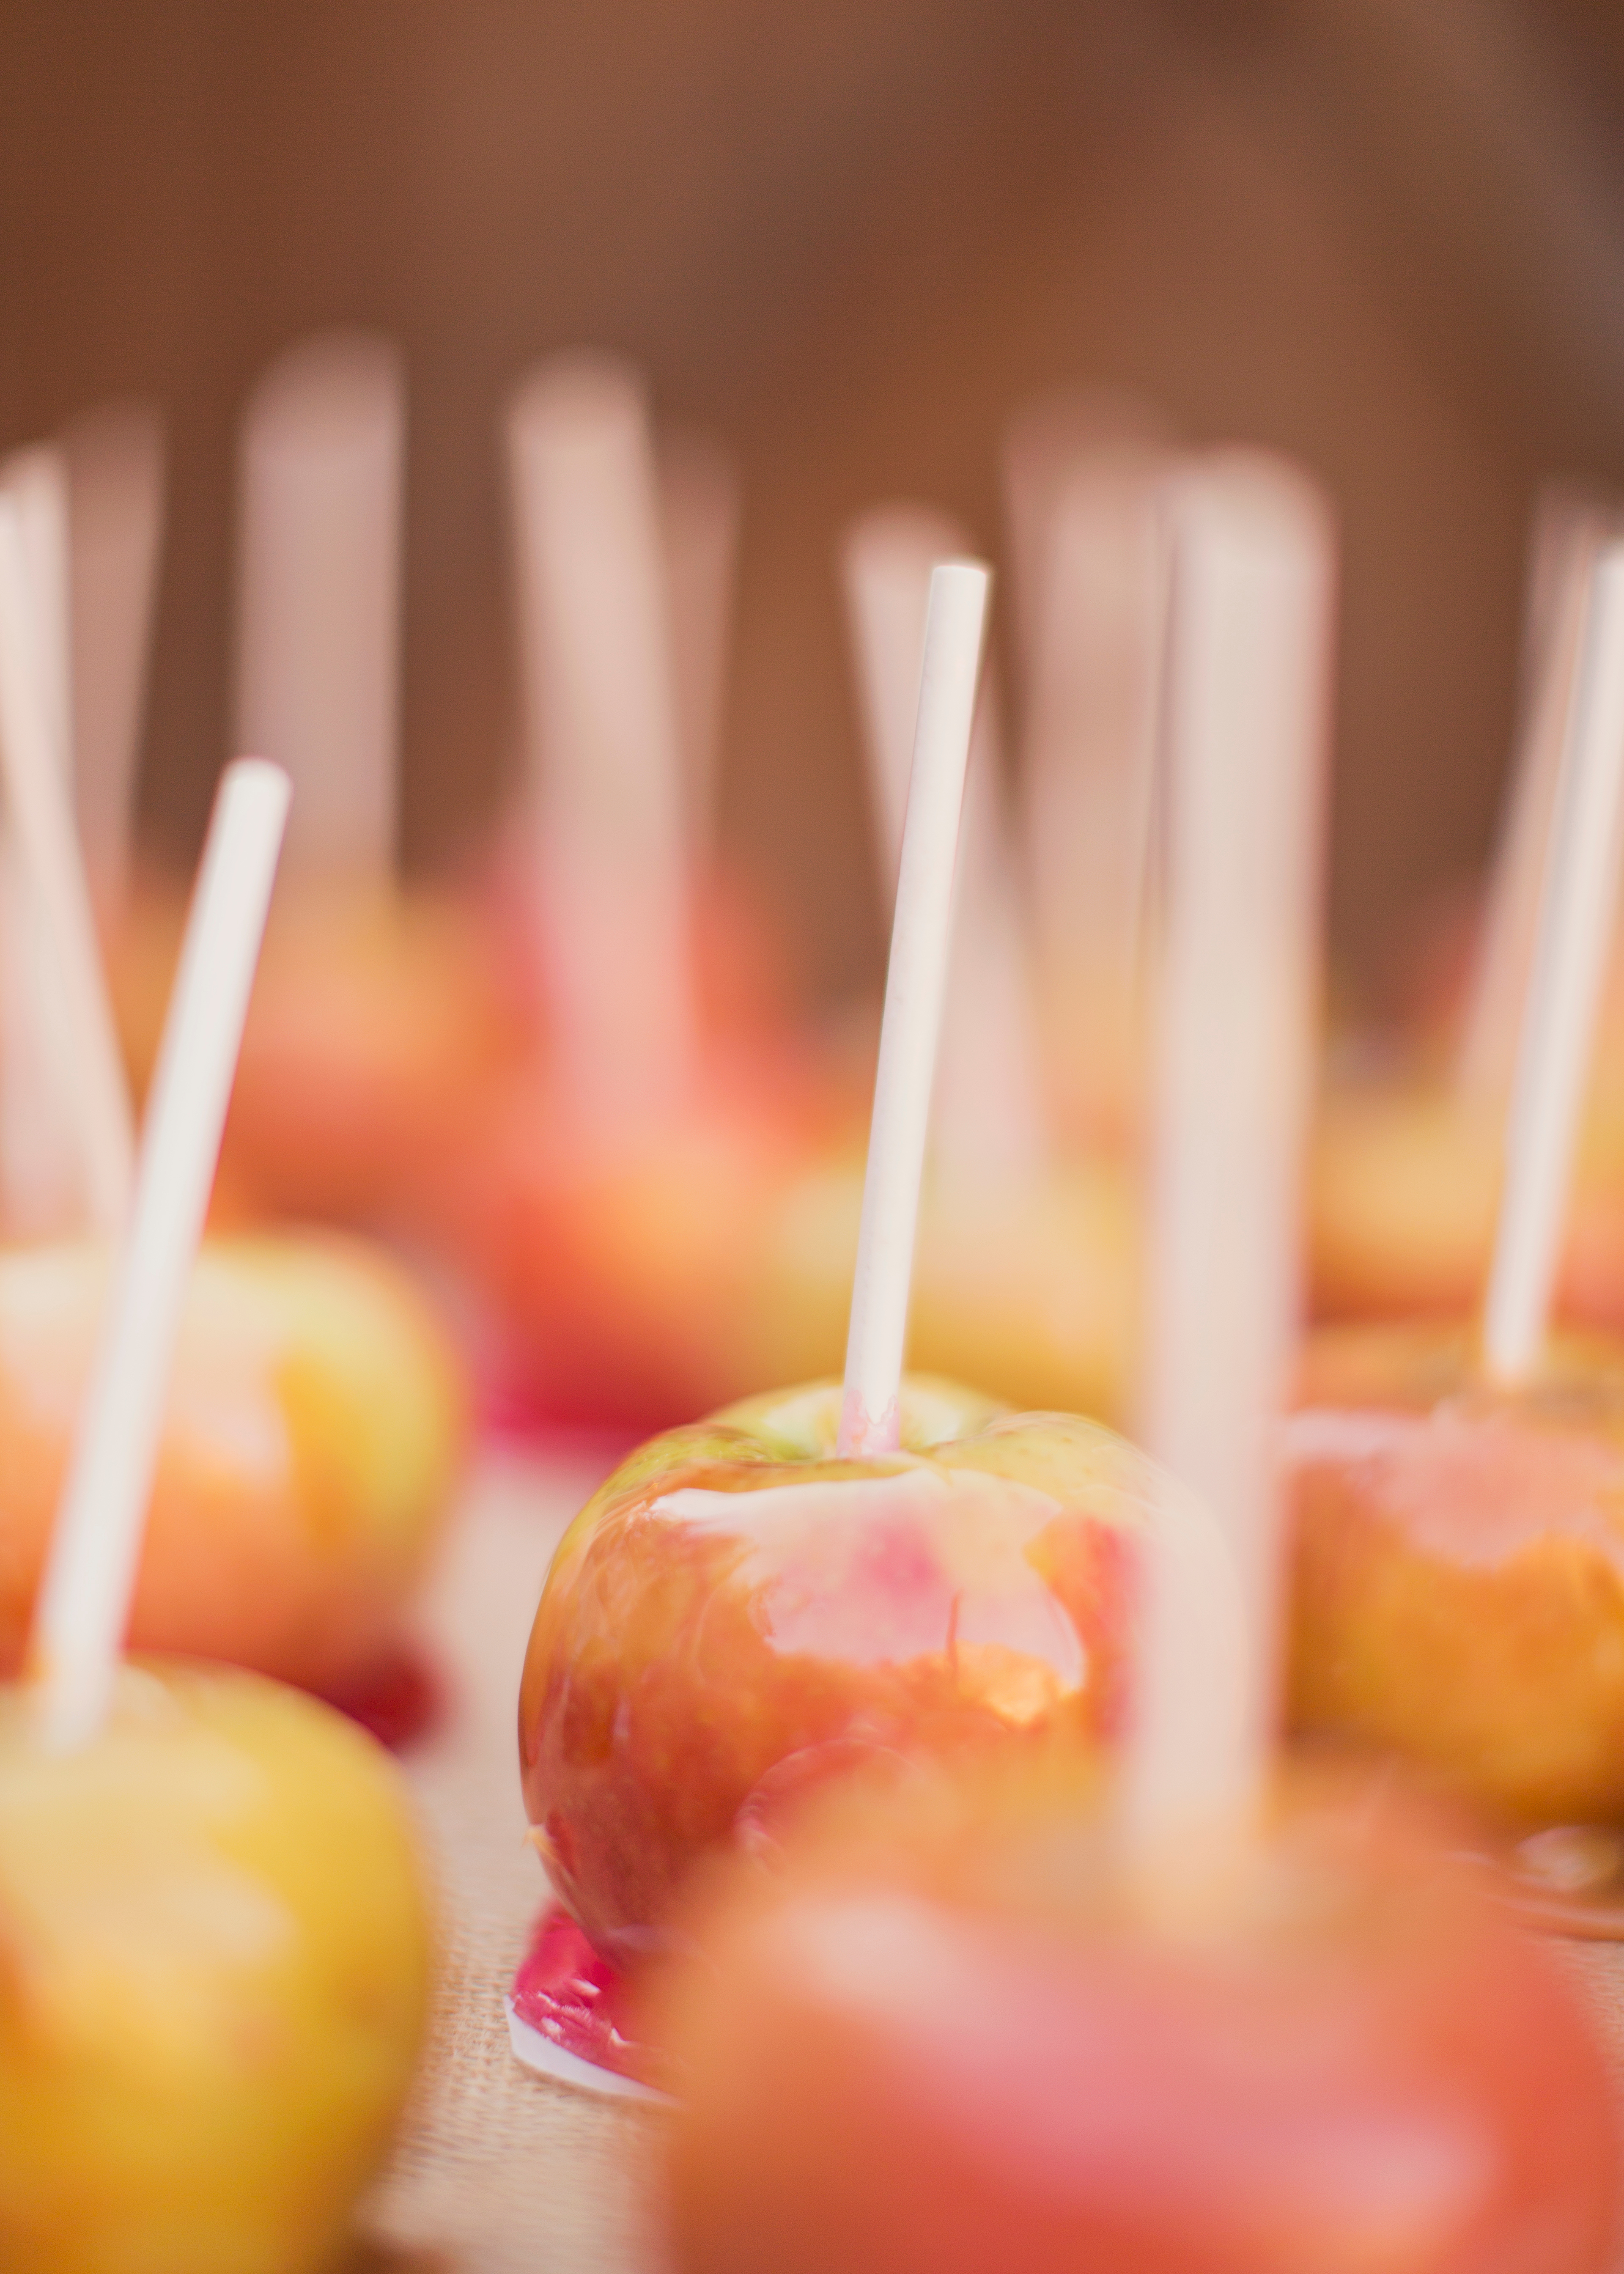 Candied Apples!